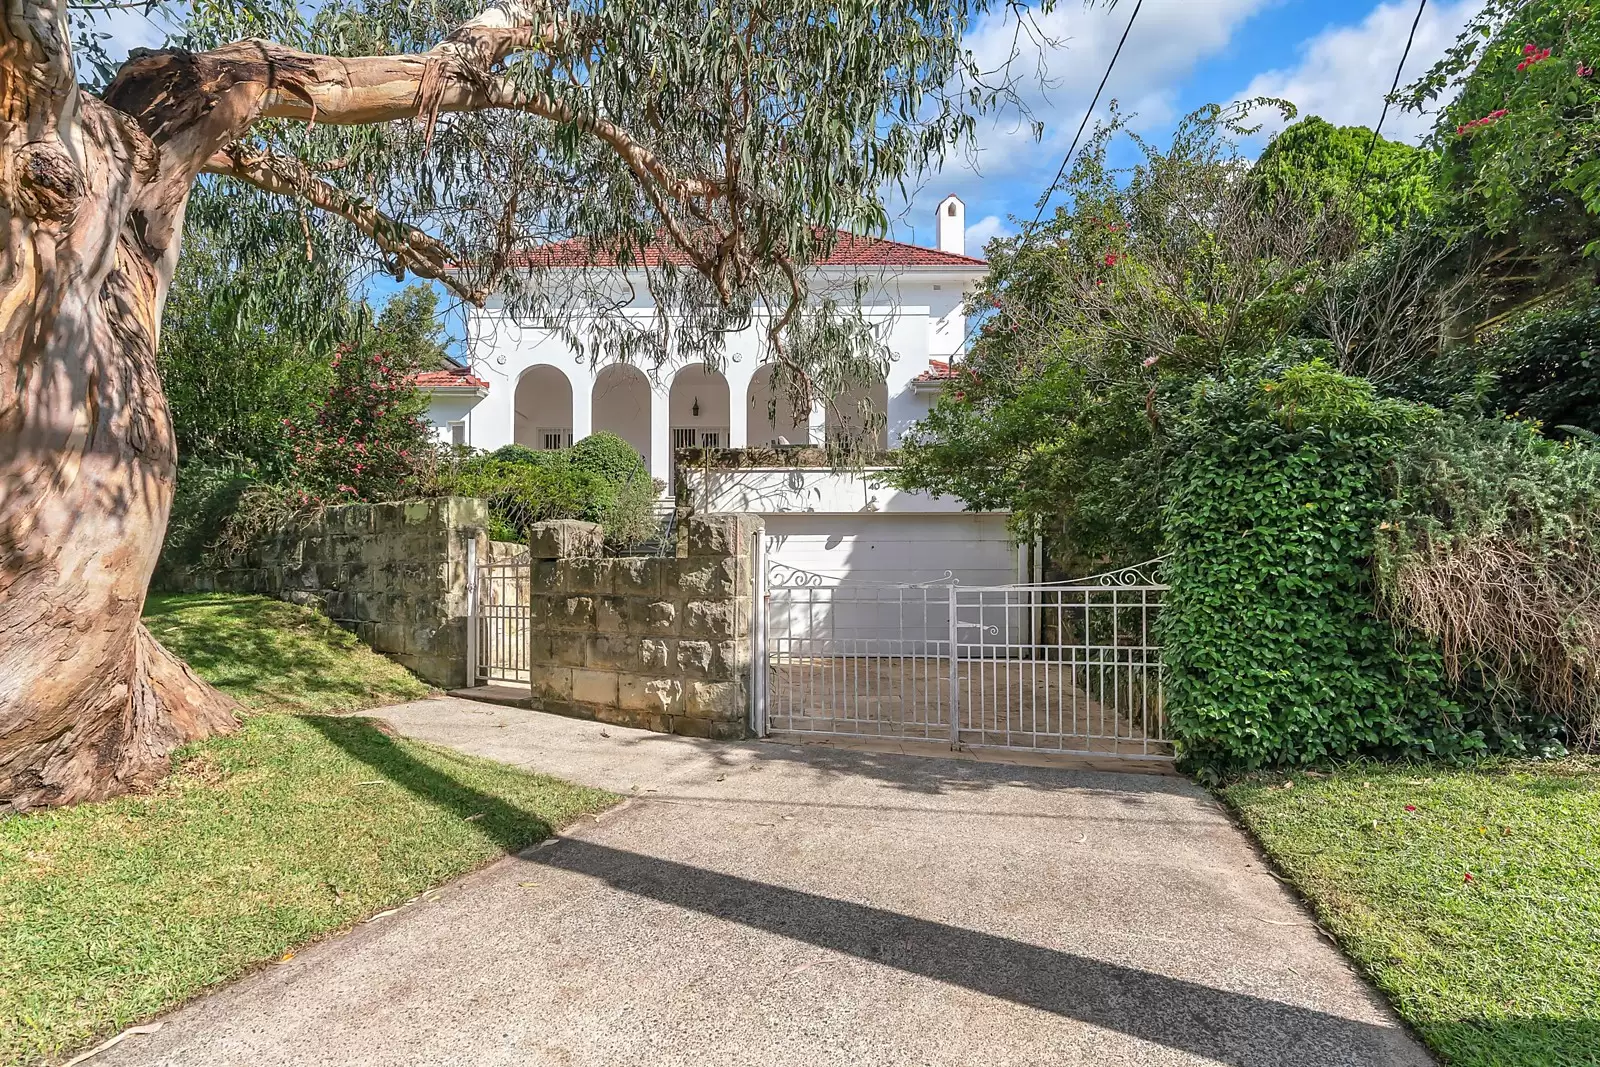 Photo #3: 40 Coolong Road, Vaucluse - Sold by Sydney Sotheby's International Realty